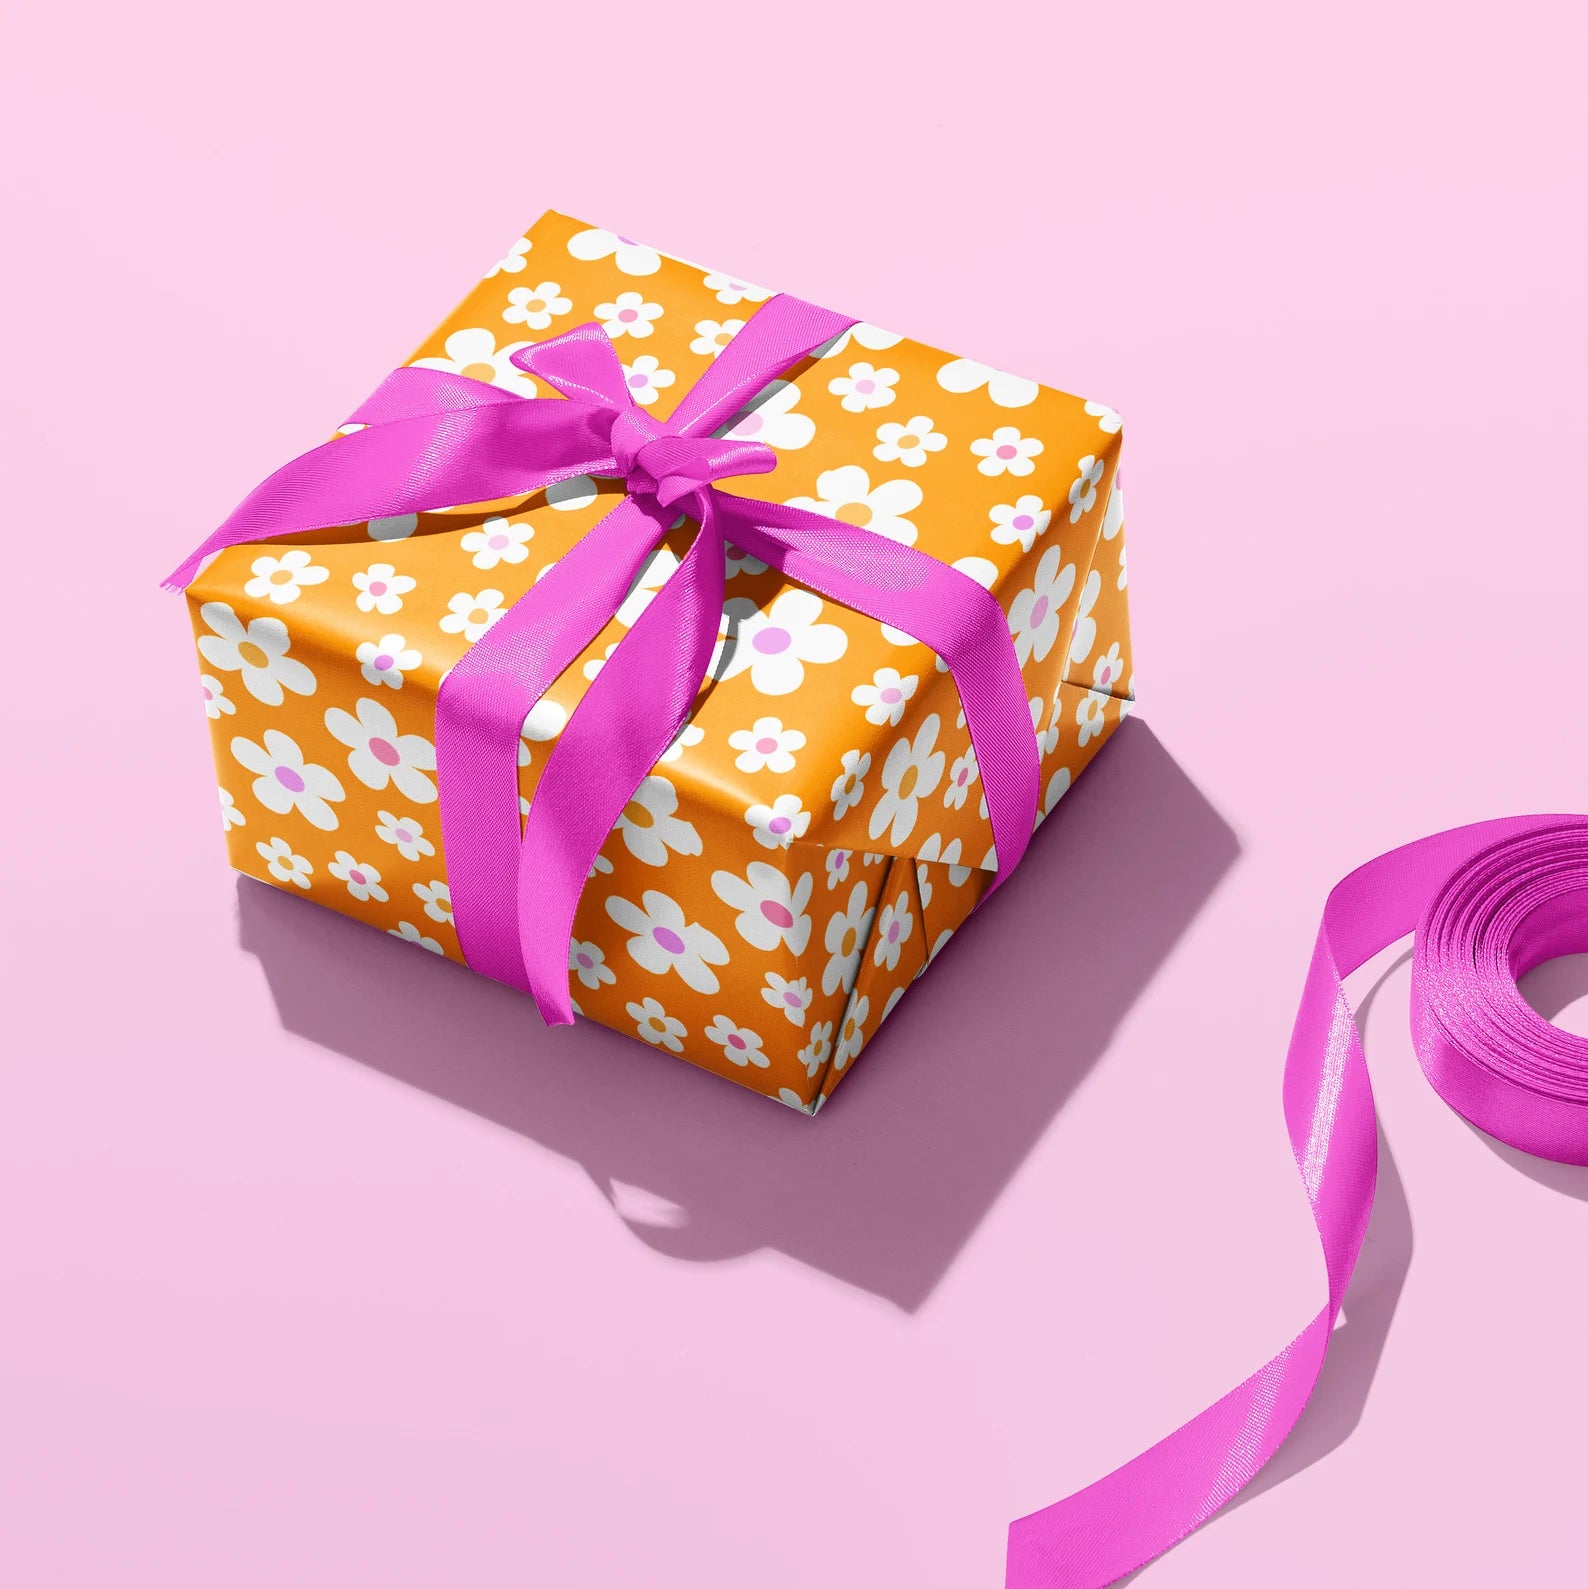 Sprinkle Club - A gift wrapped in daisy wrapping paper and pink ribbon